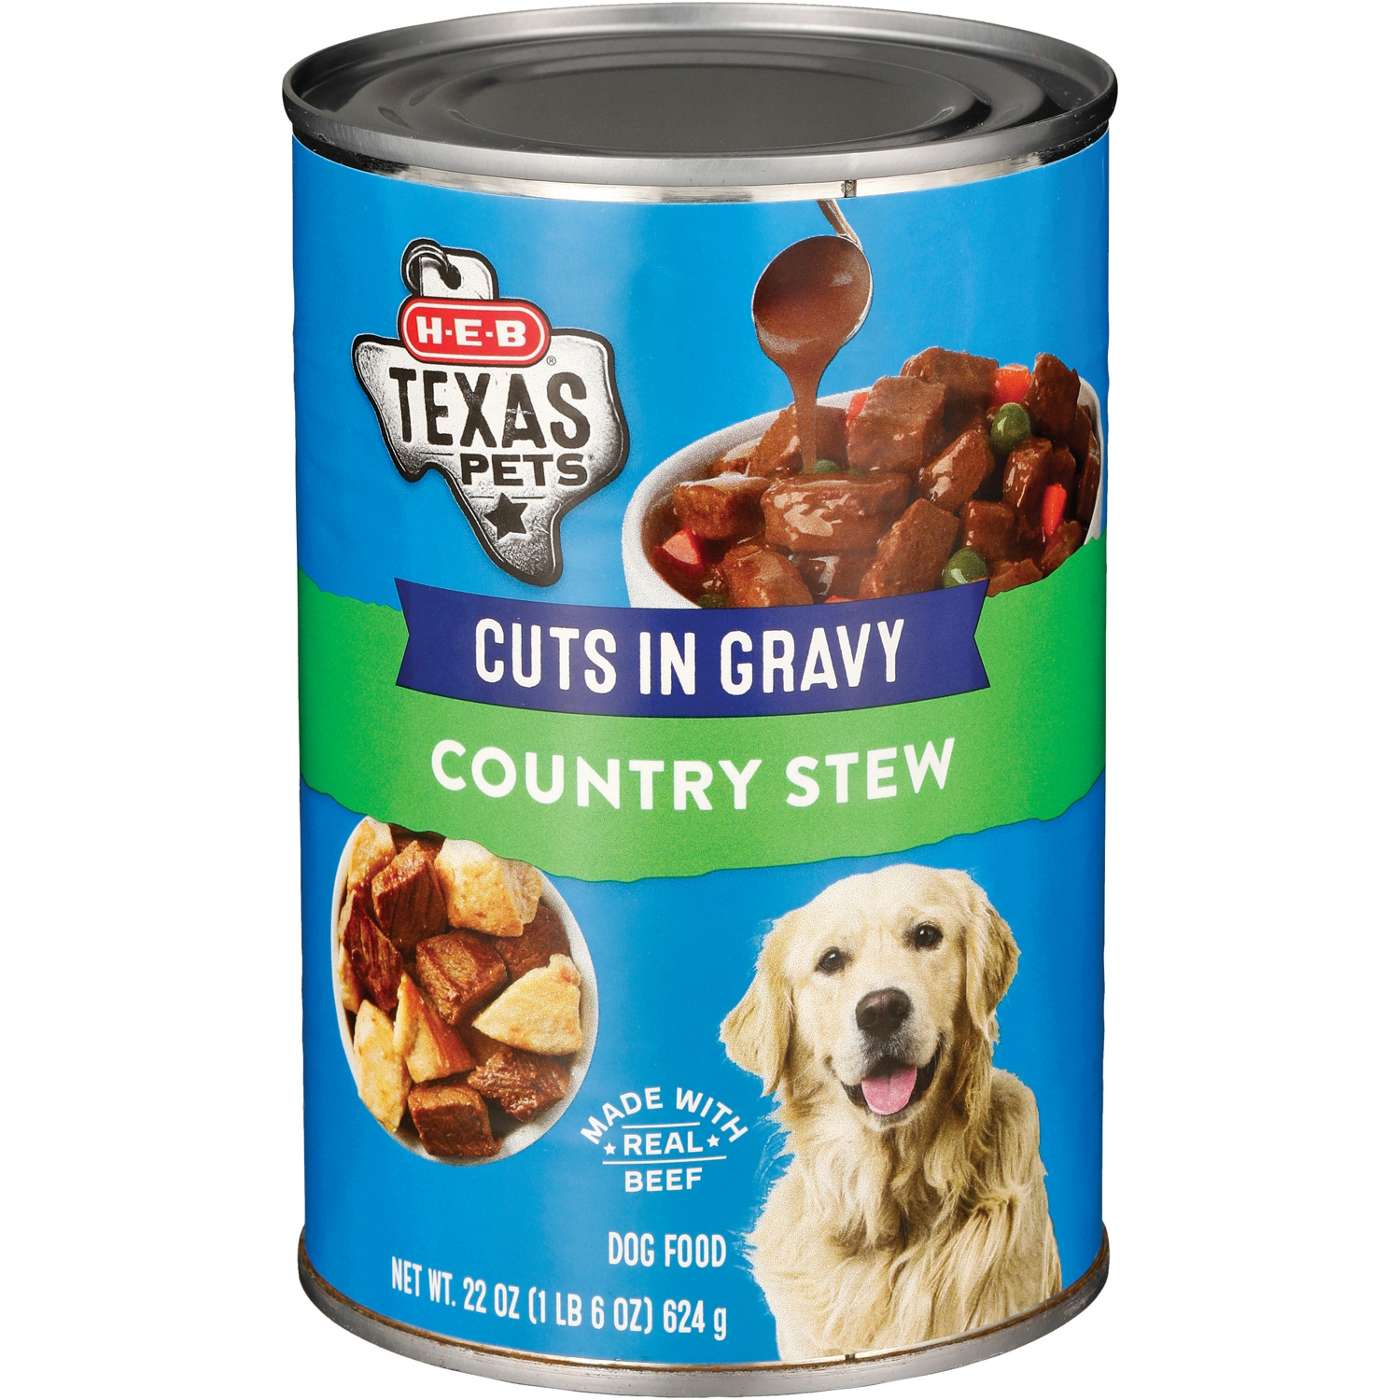 H-E-B Texas Pets Country Stew Cuts in Gravy Wet Dog Food; image 2 of 2